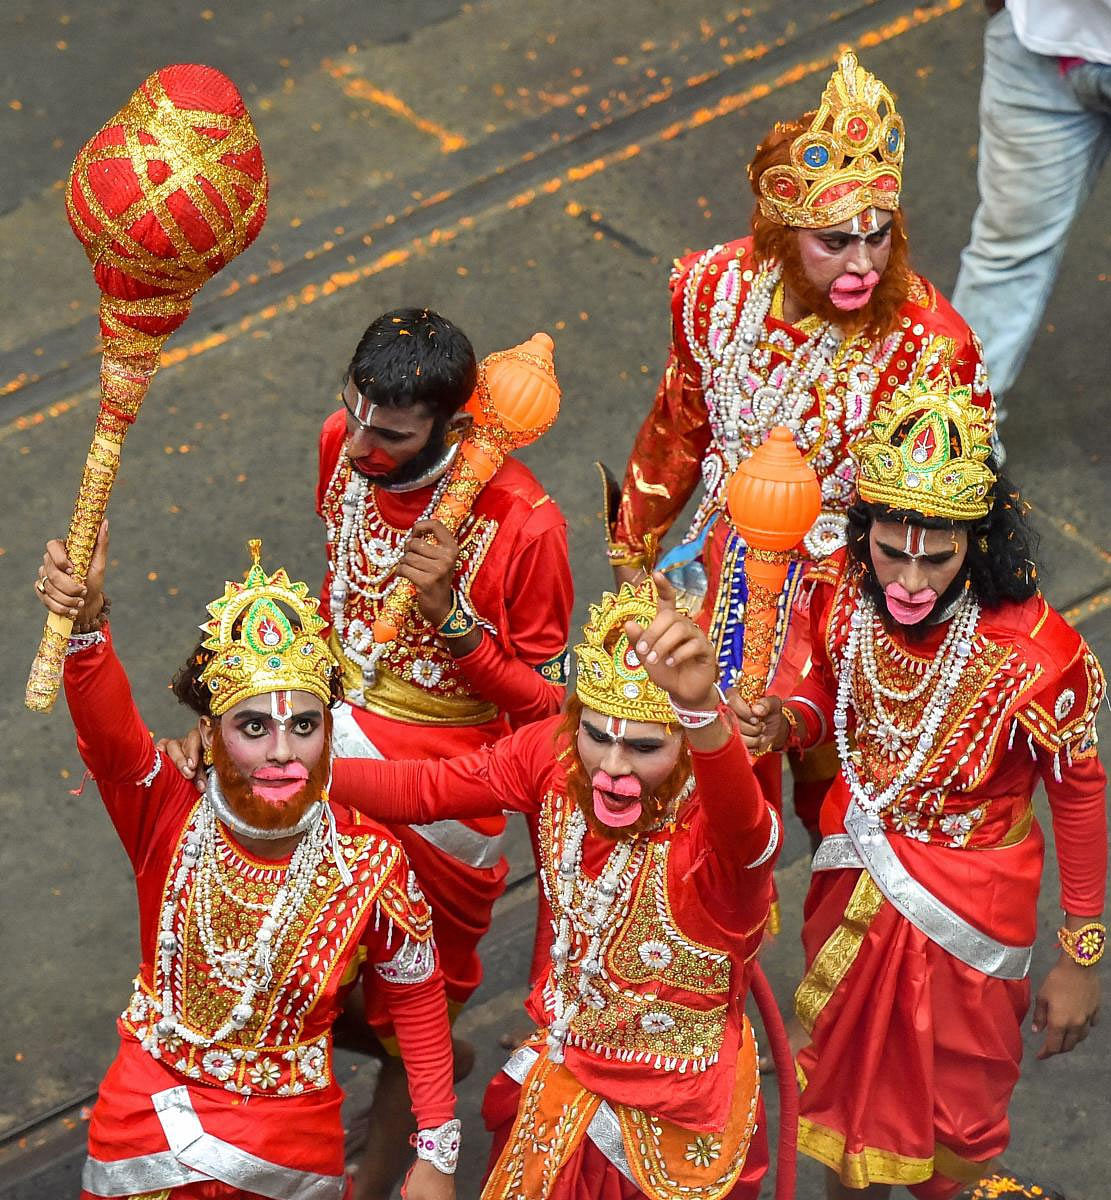 Artists take part in BJP National President Amit Shah's election roadshow for the Lok Sabha elections, in Kolkata, Tuesday, May 14, 2019. (PTI Photo)